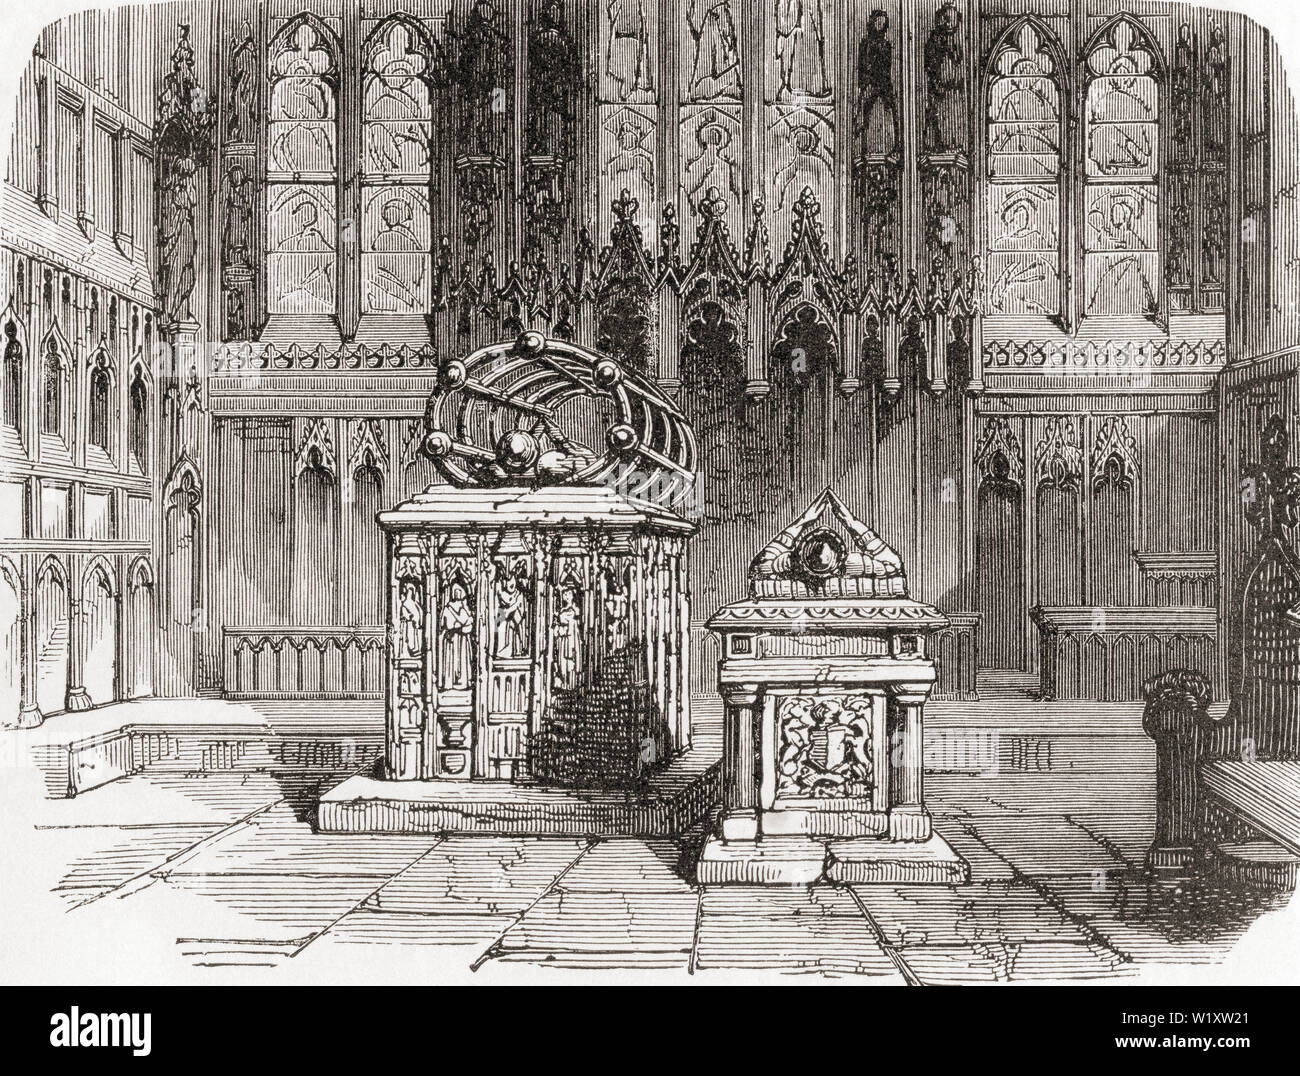 Beauchamp chapel, St. Mary's Church, Warwick, Warwickshire, England, containing the effigial monuments of Richard de Beauchamp, 13th Earl of Warwick, Ambrose Dudley, 3rd Earl of Warwick, and Robert Dudley, 1st Earl of Leicester. From English Pictures, published 1890. Stock Photo